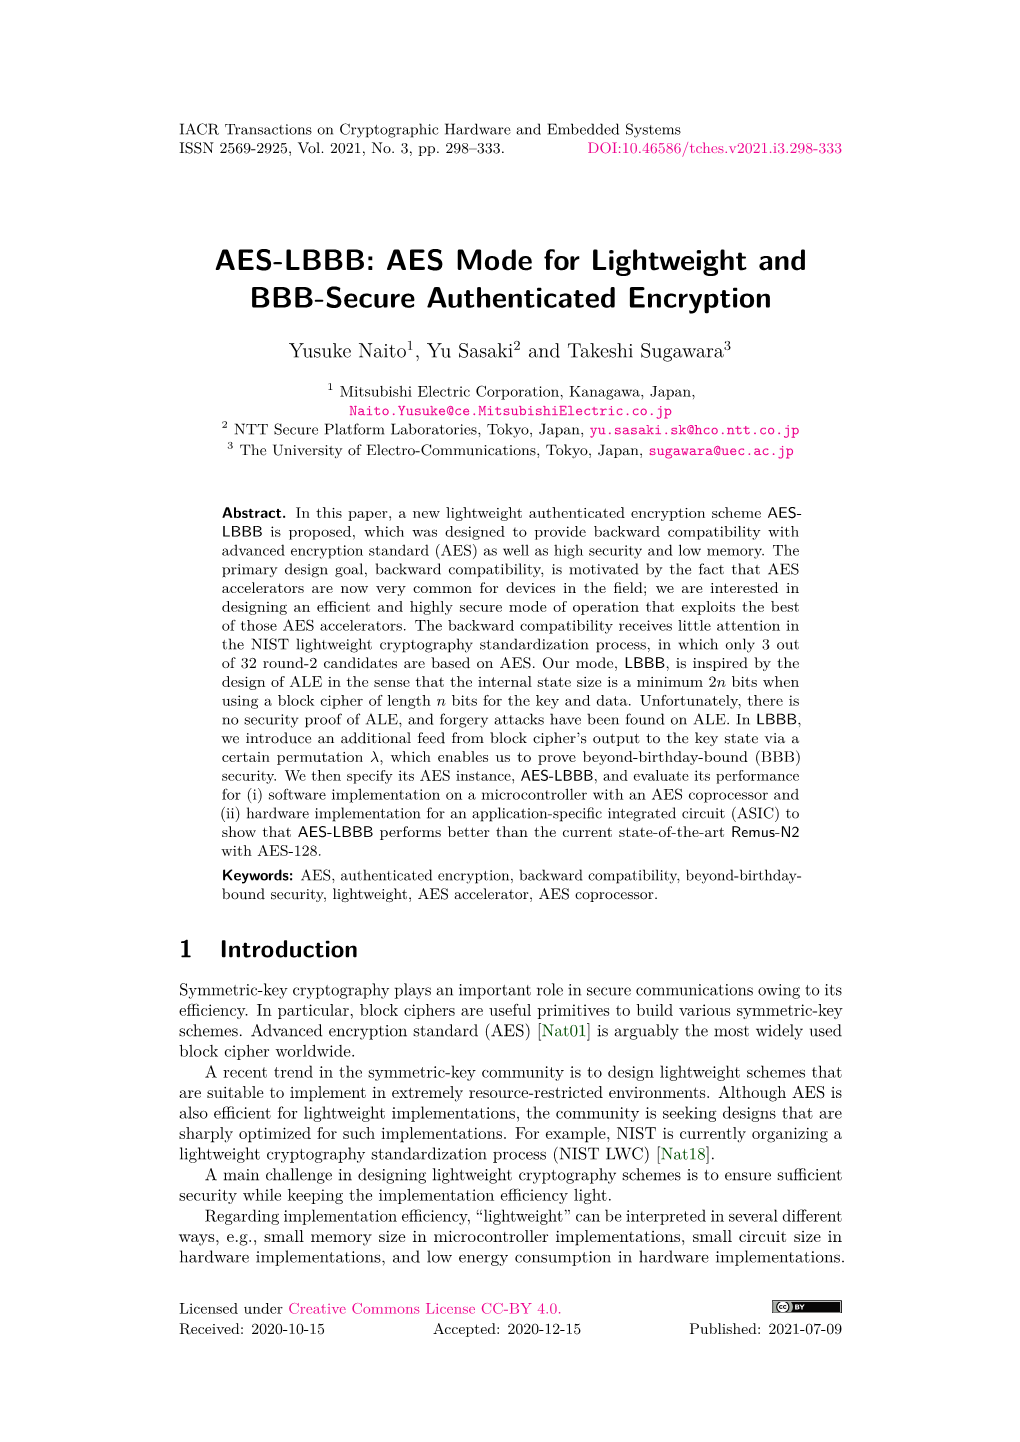 AES Mode for Lightweight and BBB-Secure Authenticated Encryption